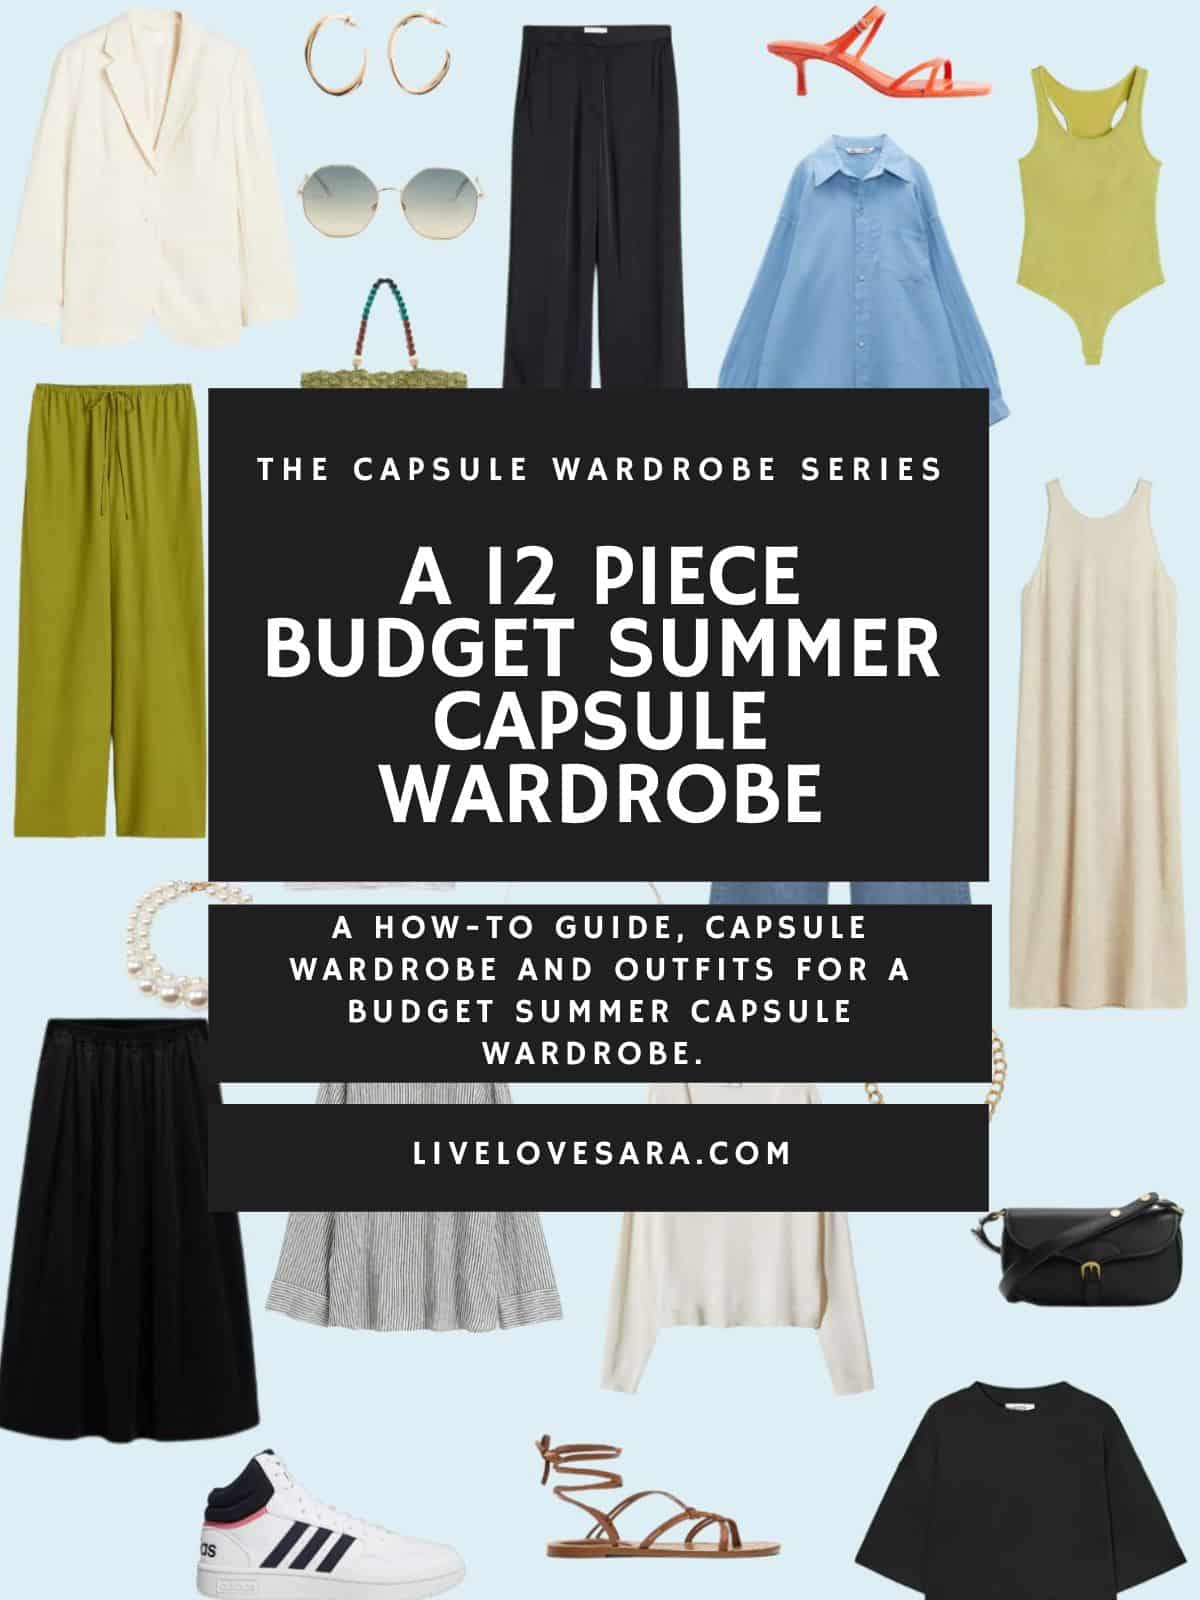 A light blue background with 12 clothing items plus shoes and accessories for a Budget summer capsule wardrobe. In the middle is a black box with white text that reads, "A 12 Piece Budget Summer Capsule Wardrobe."